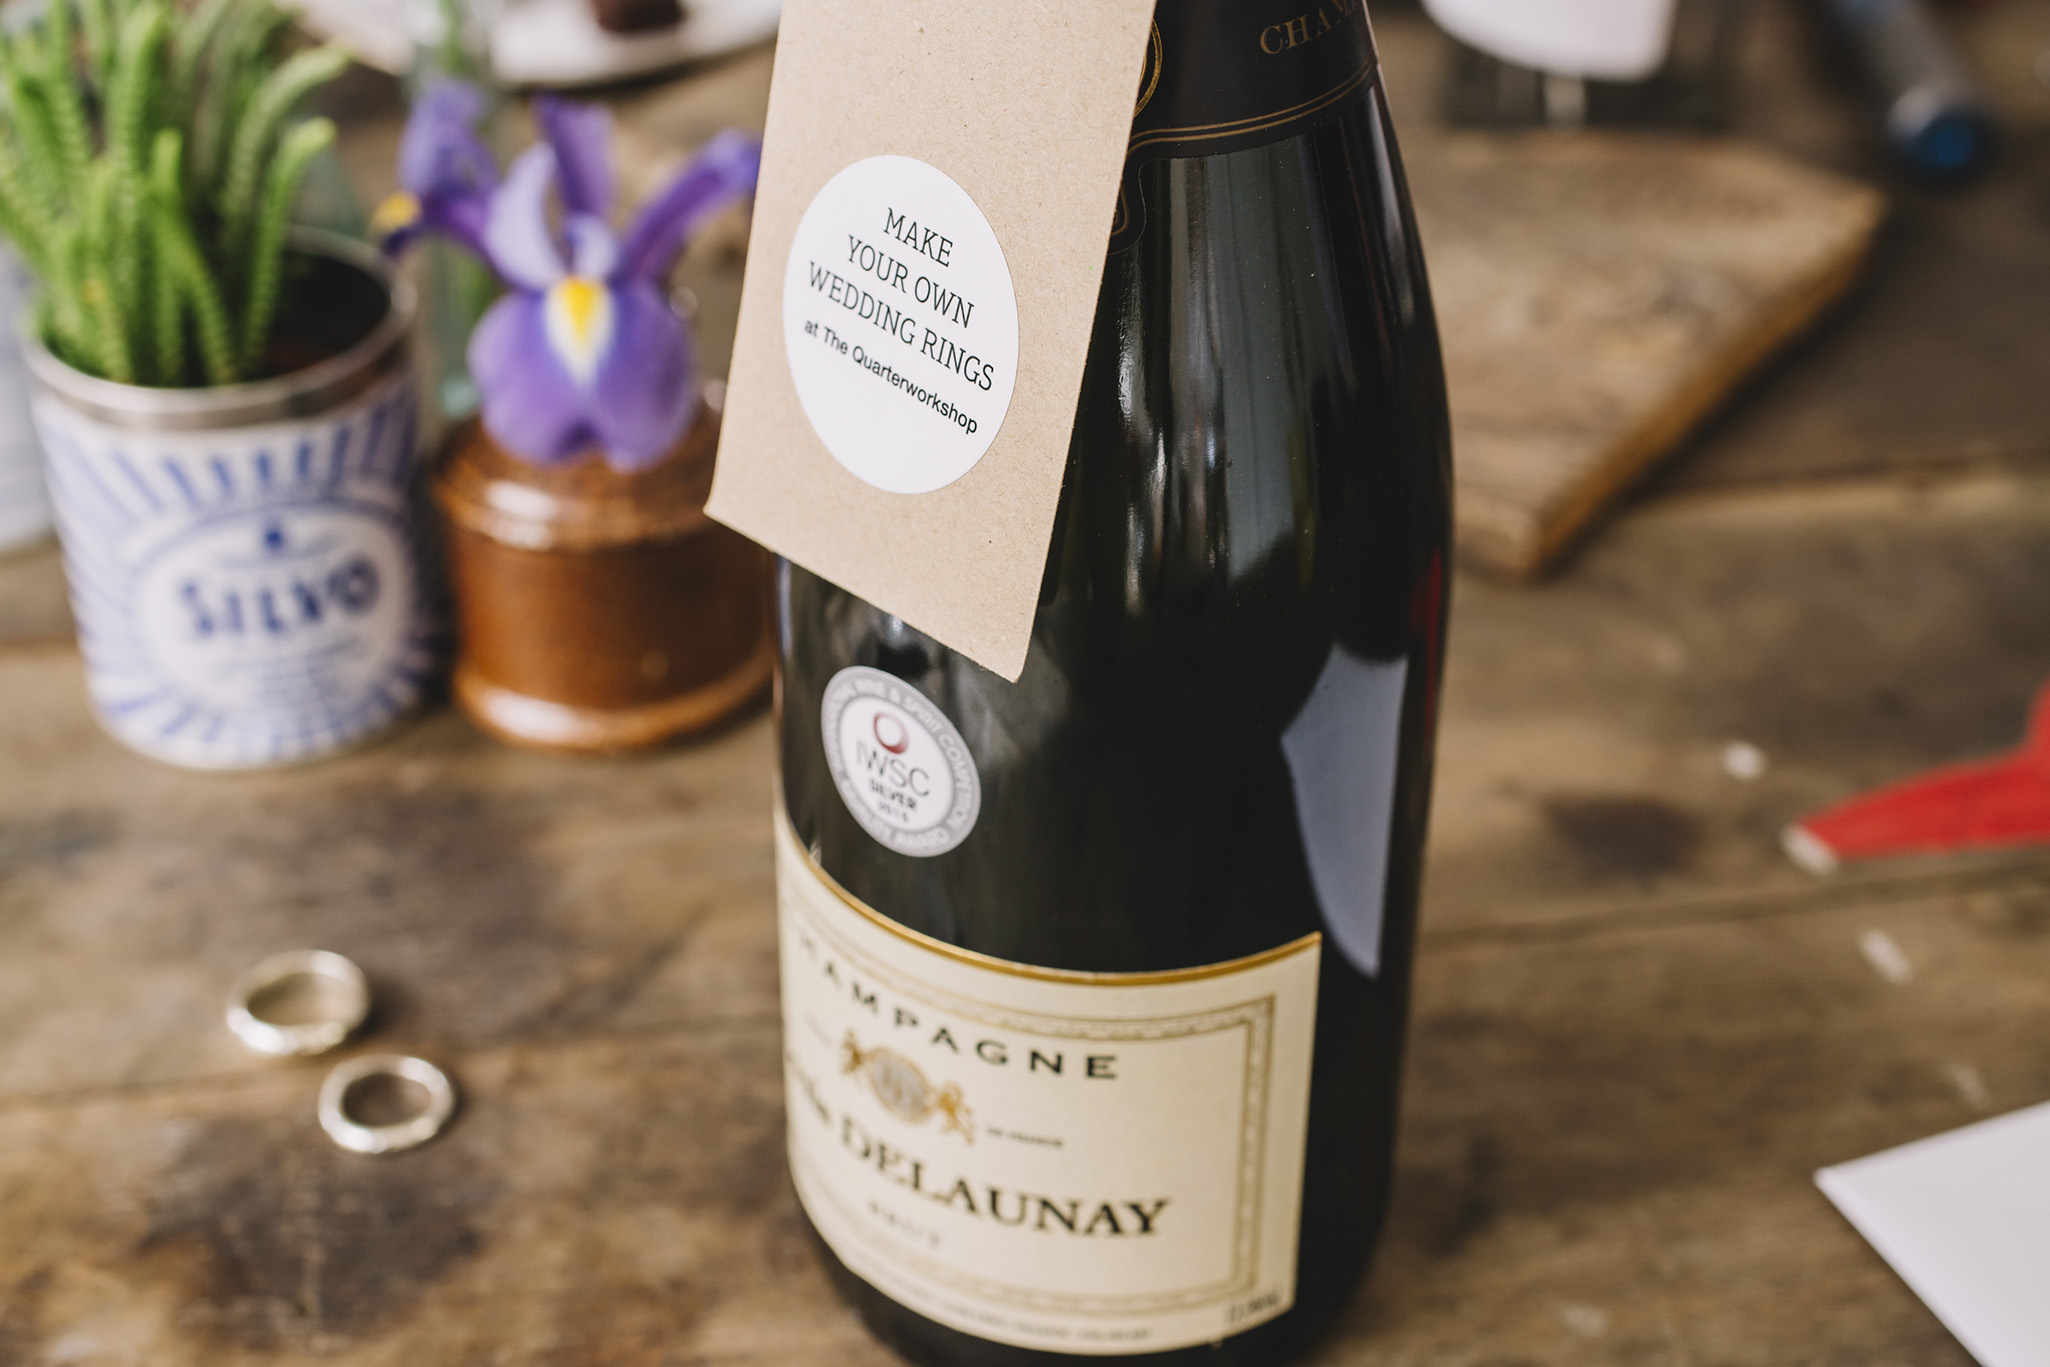 champagne to celebrate making your own wedding rings 